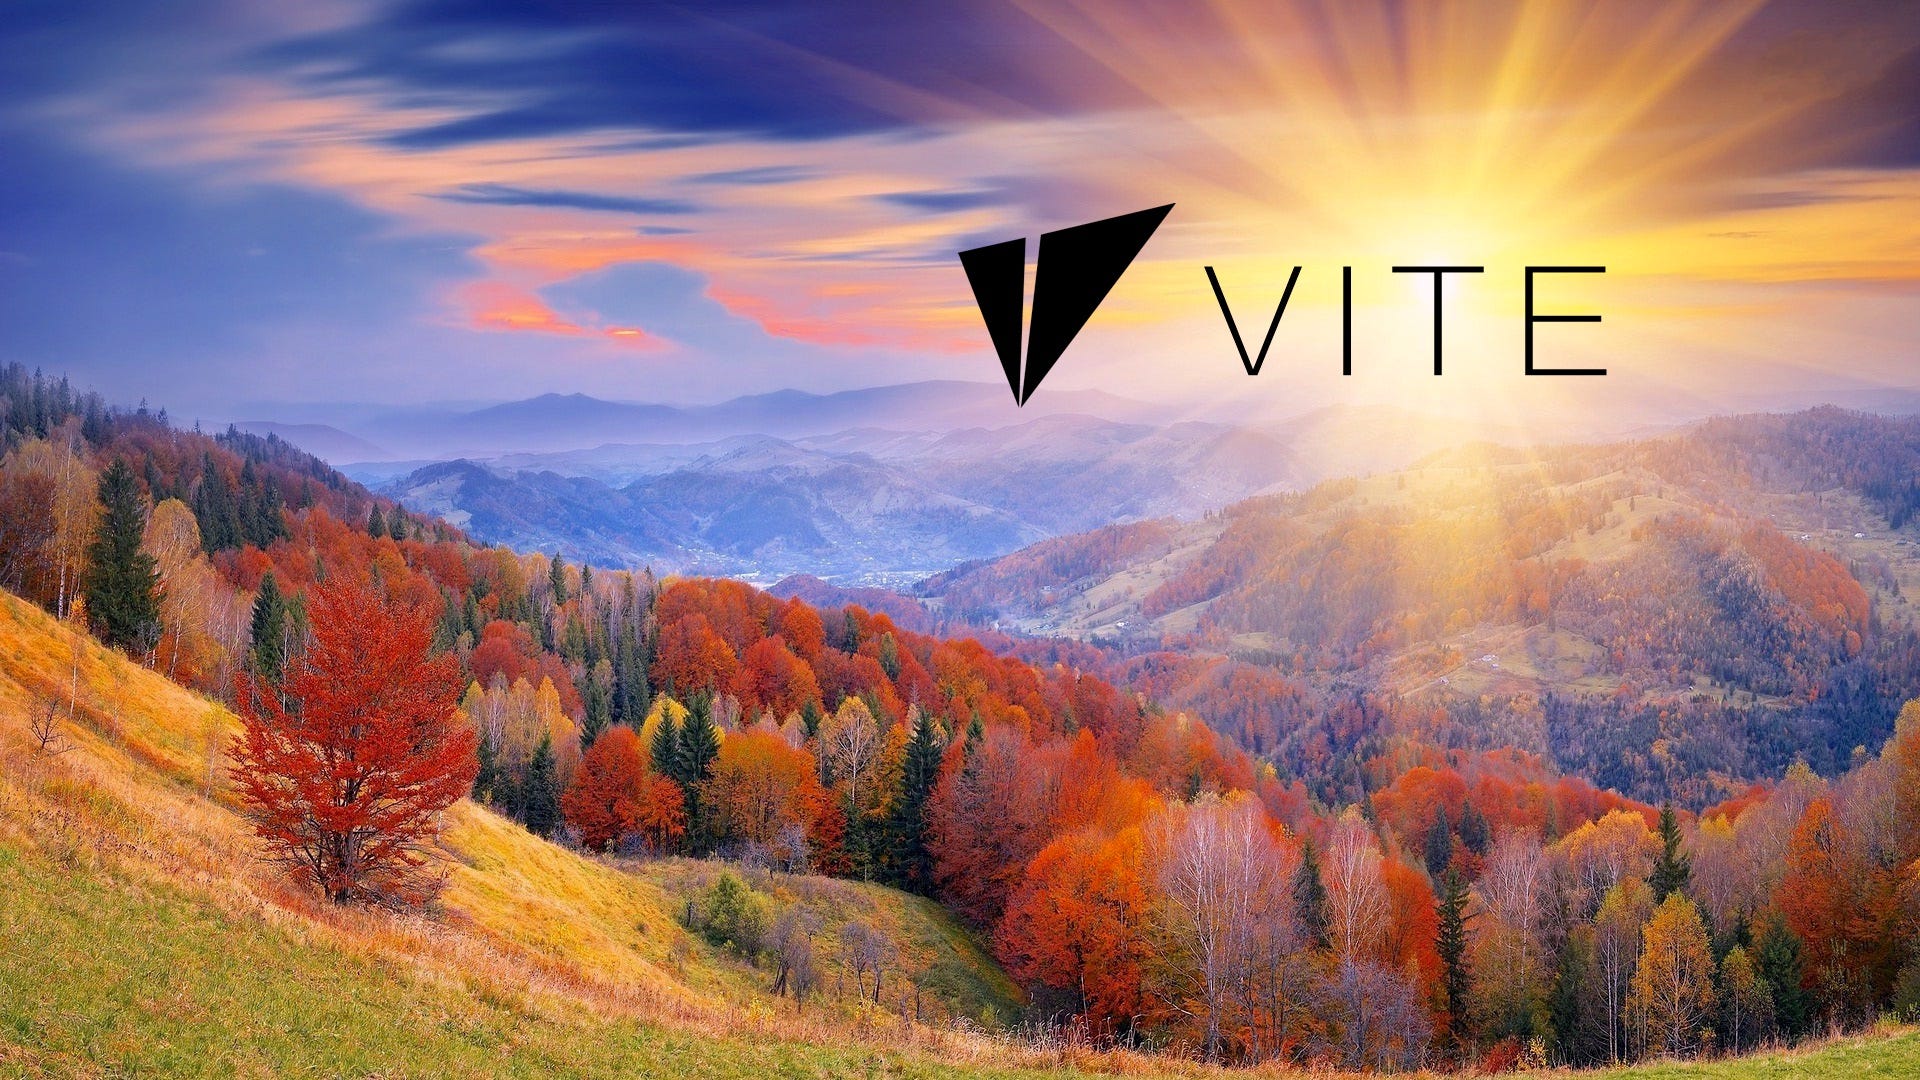 Bittrex Trading Campaign. Buy VITE on Bittrex to earn more ...